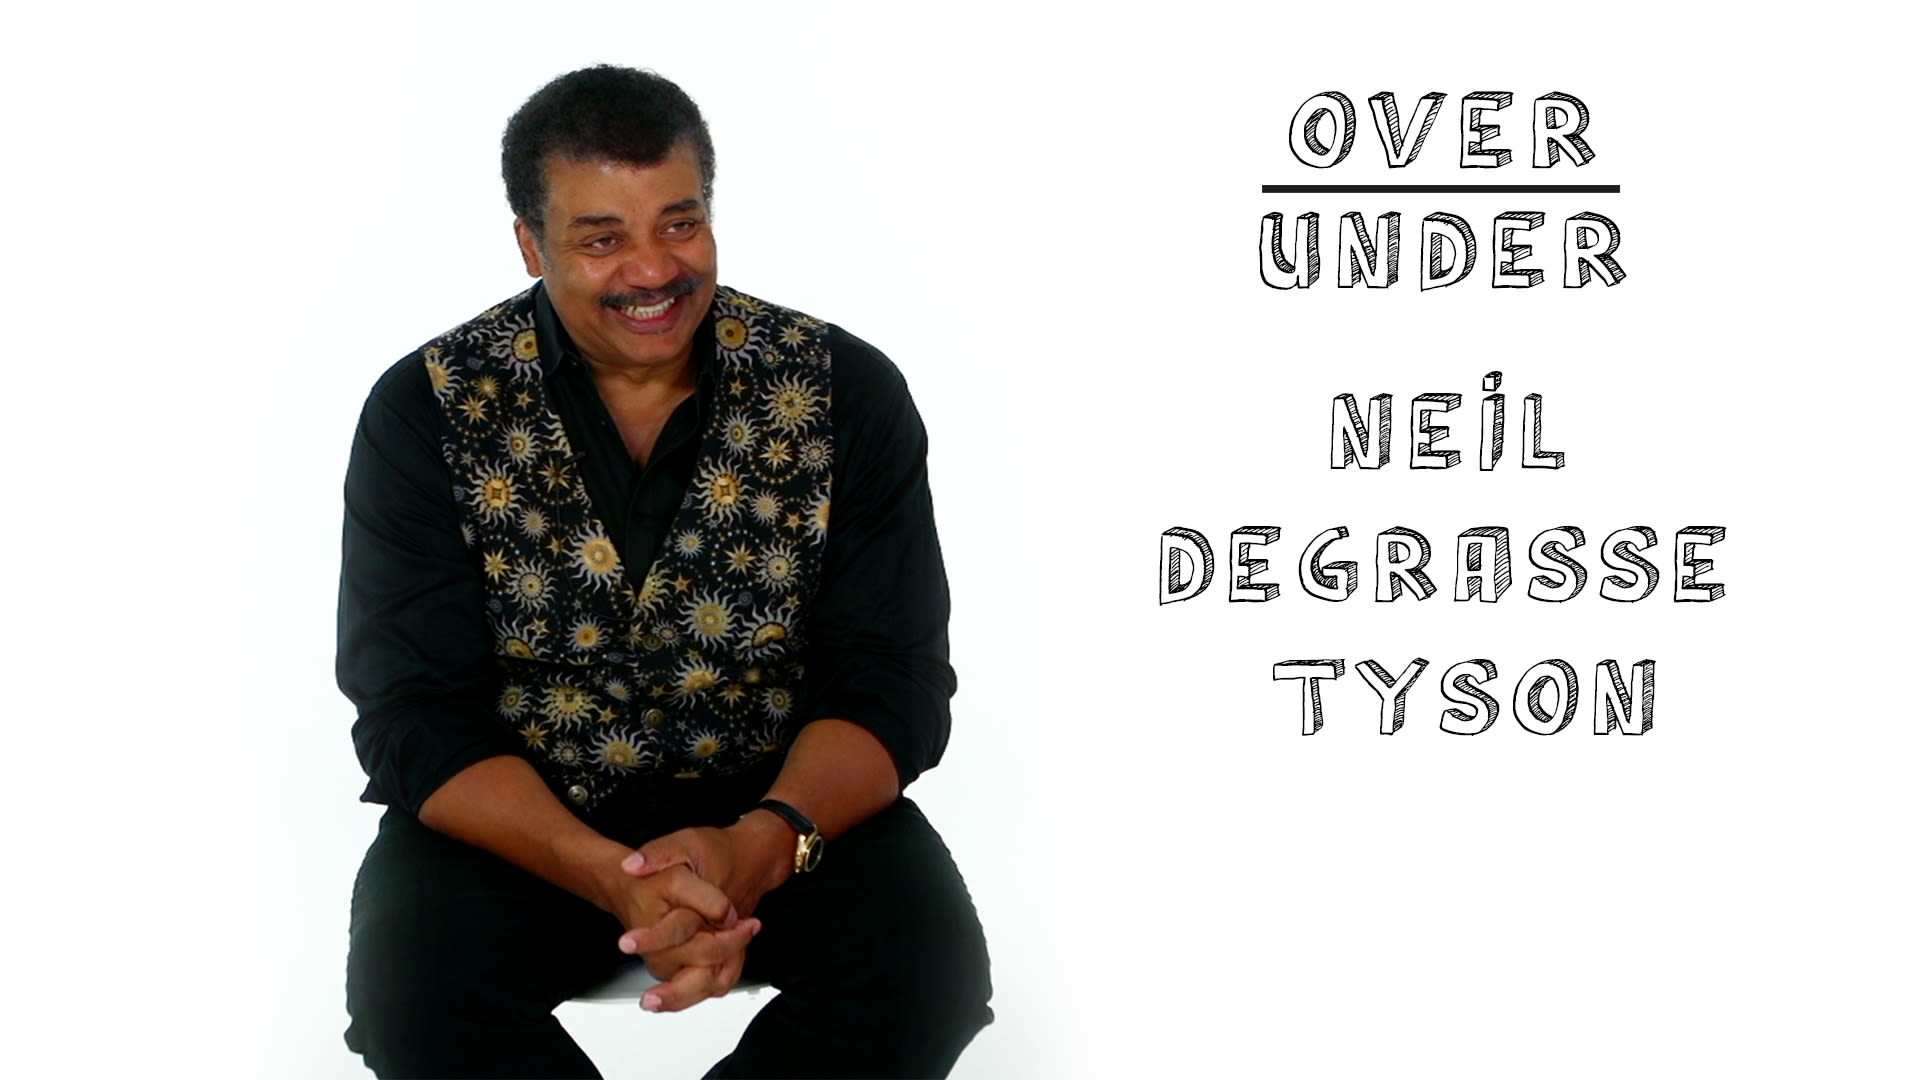 Watch Neil deGrasse Tyson Rates Exotic Male Dancing, GZA, and Galactic  Apparel | Over/Under | Pitchfork